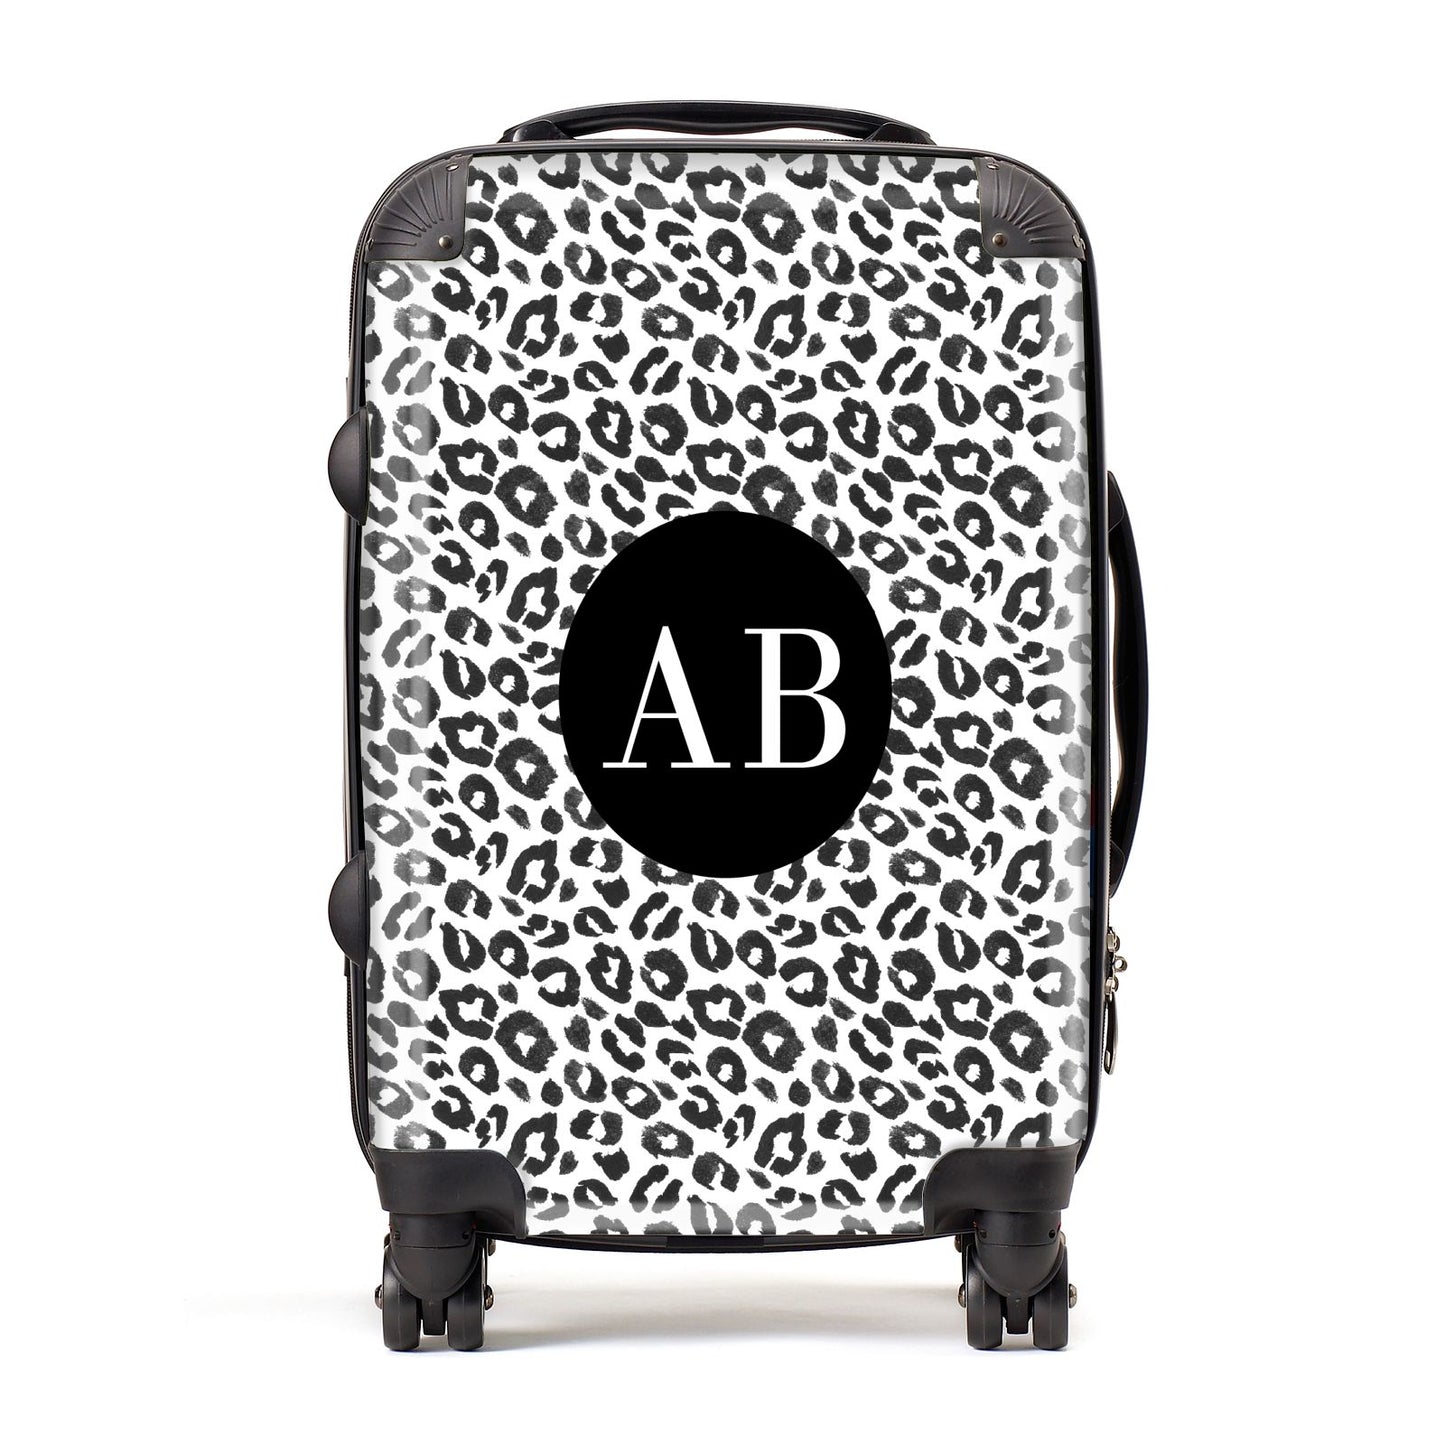 Leopard Print Black and White Suitcase